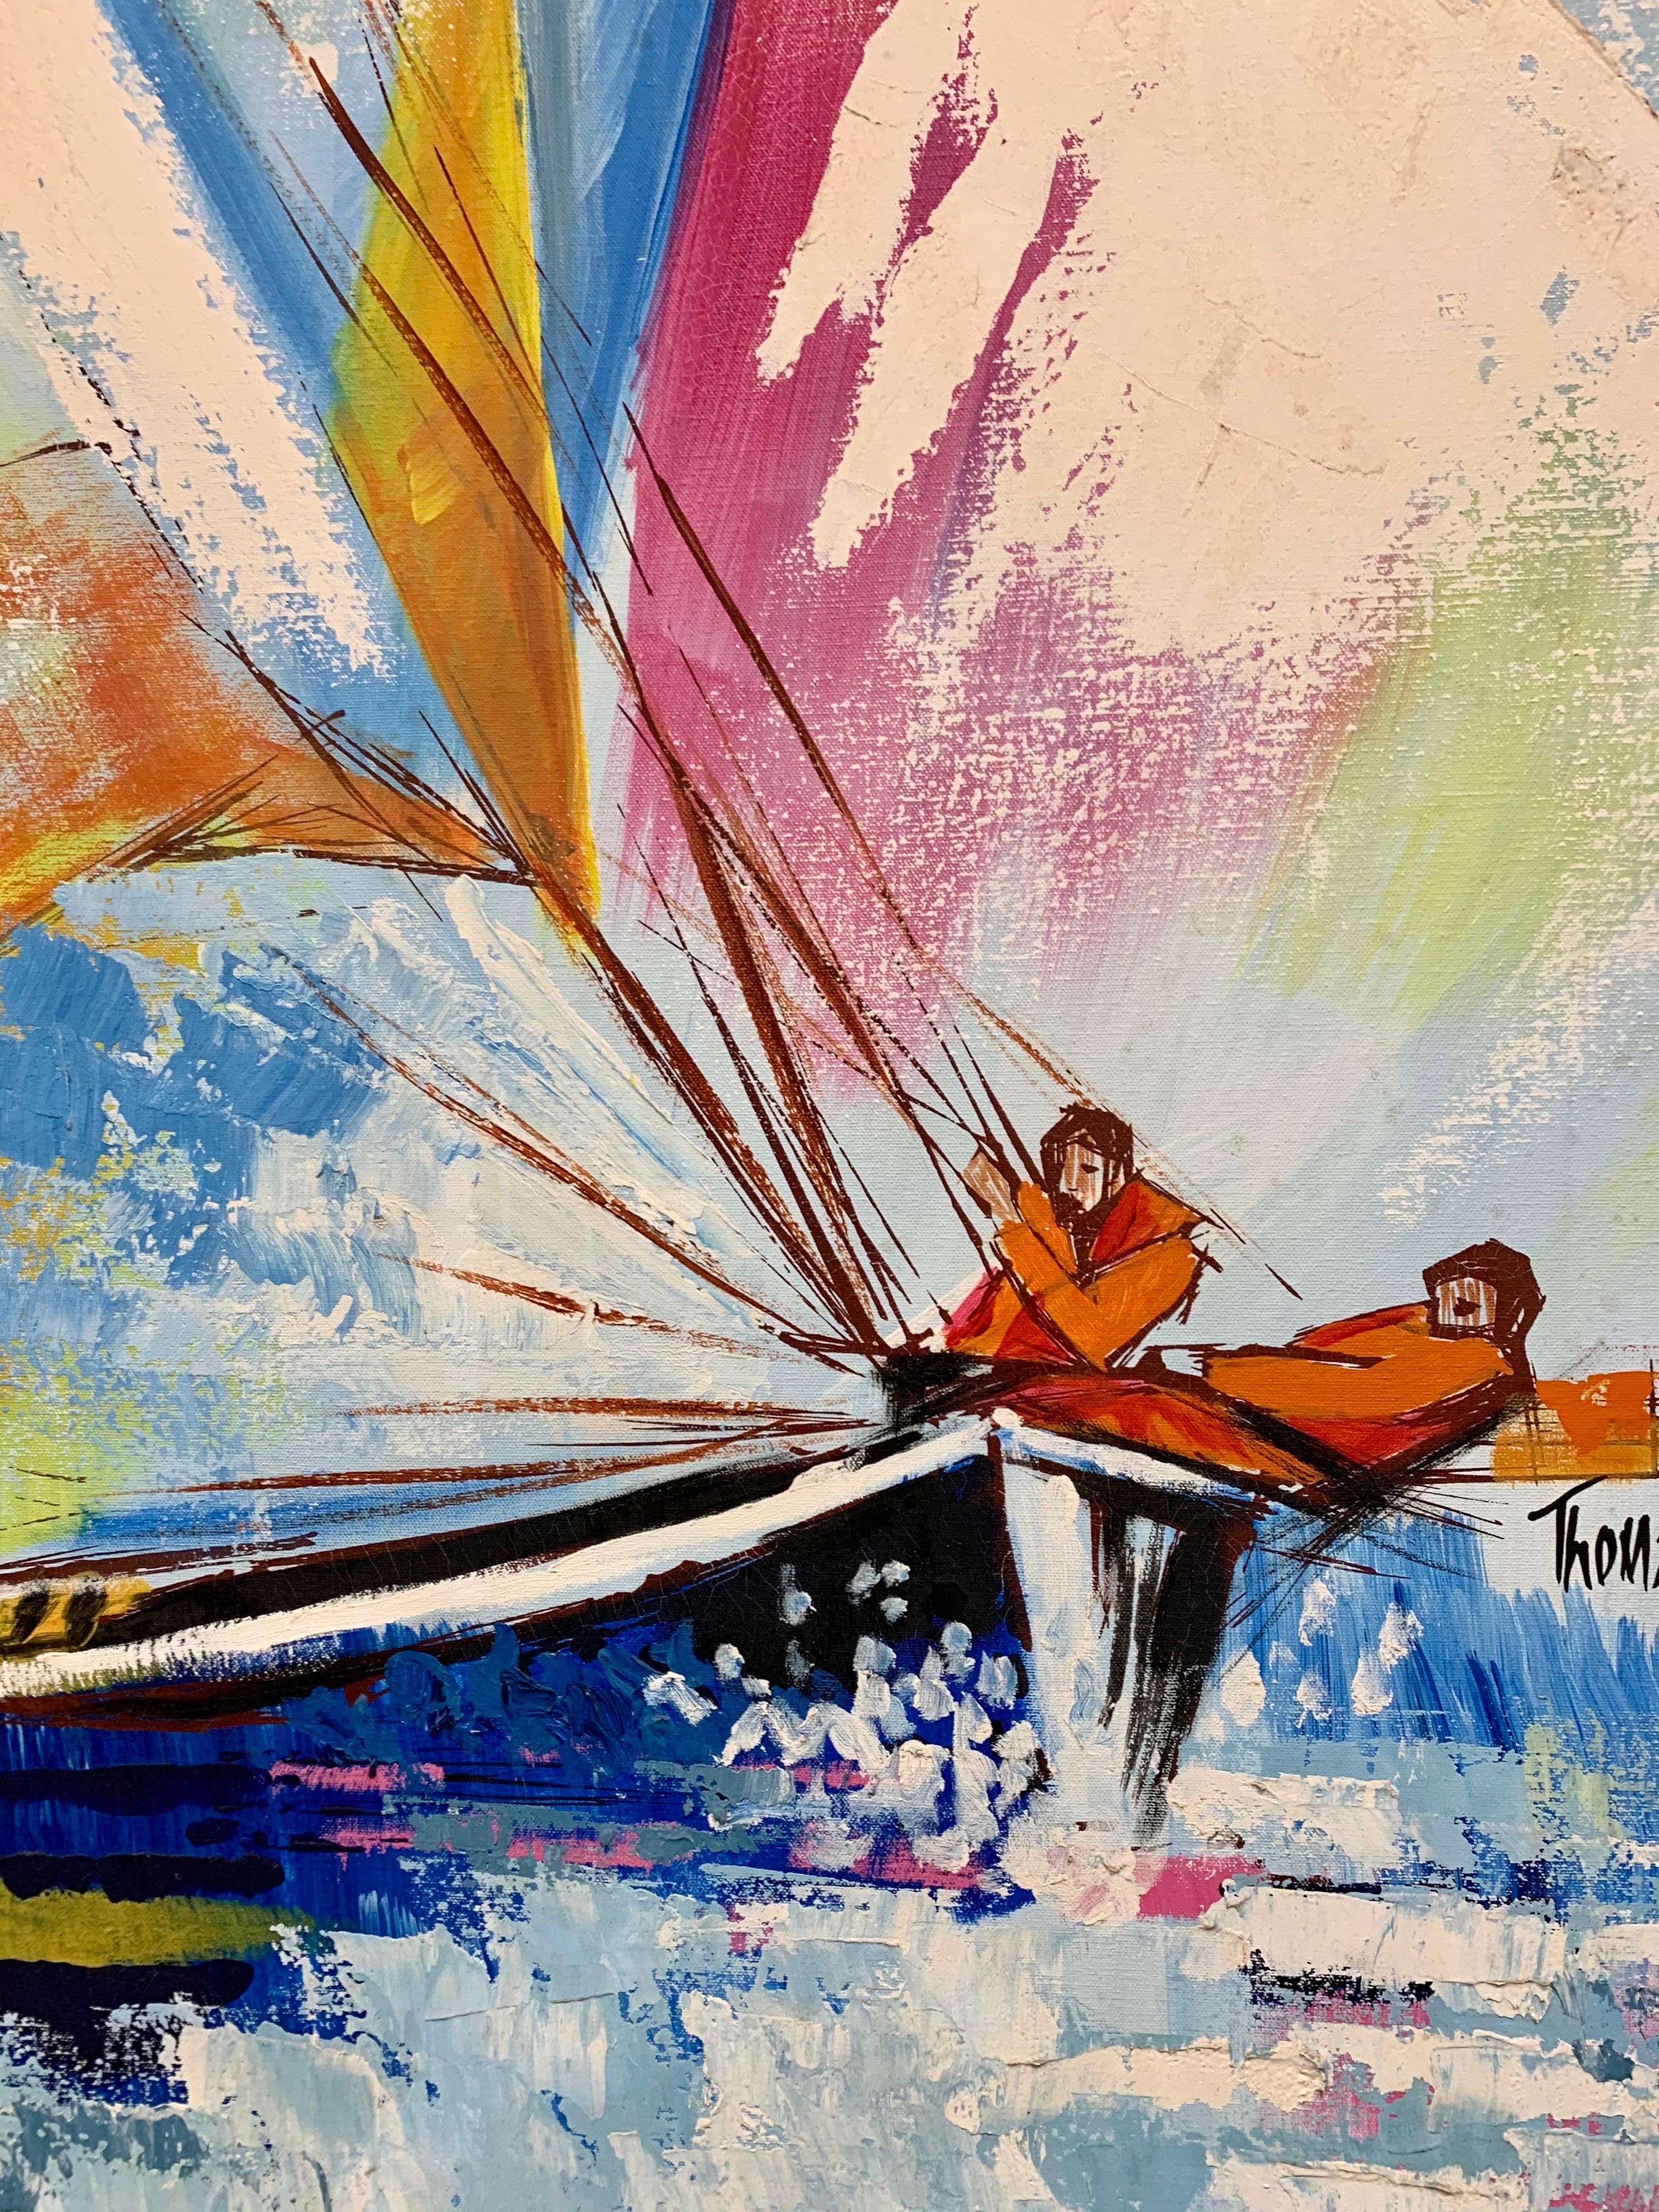 Vibrant mid century original painting of a sailboat in the America’s Cup races. Signed lower right. Thomas Lee signature at bottom. Stunning.